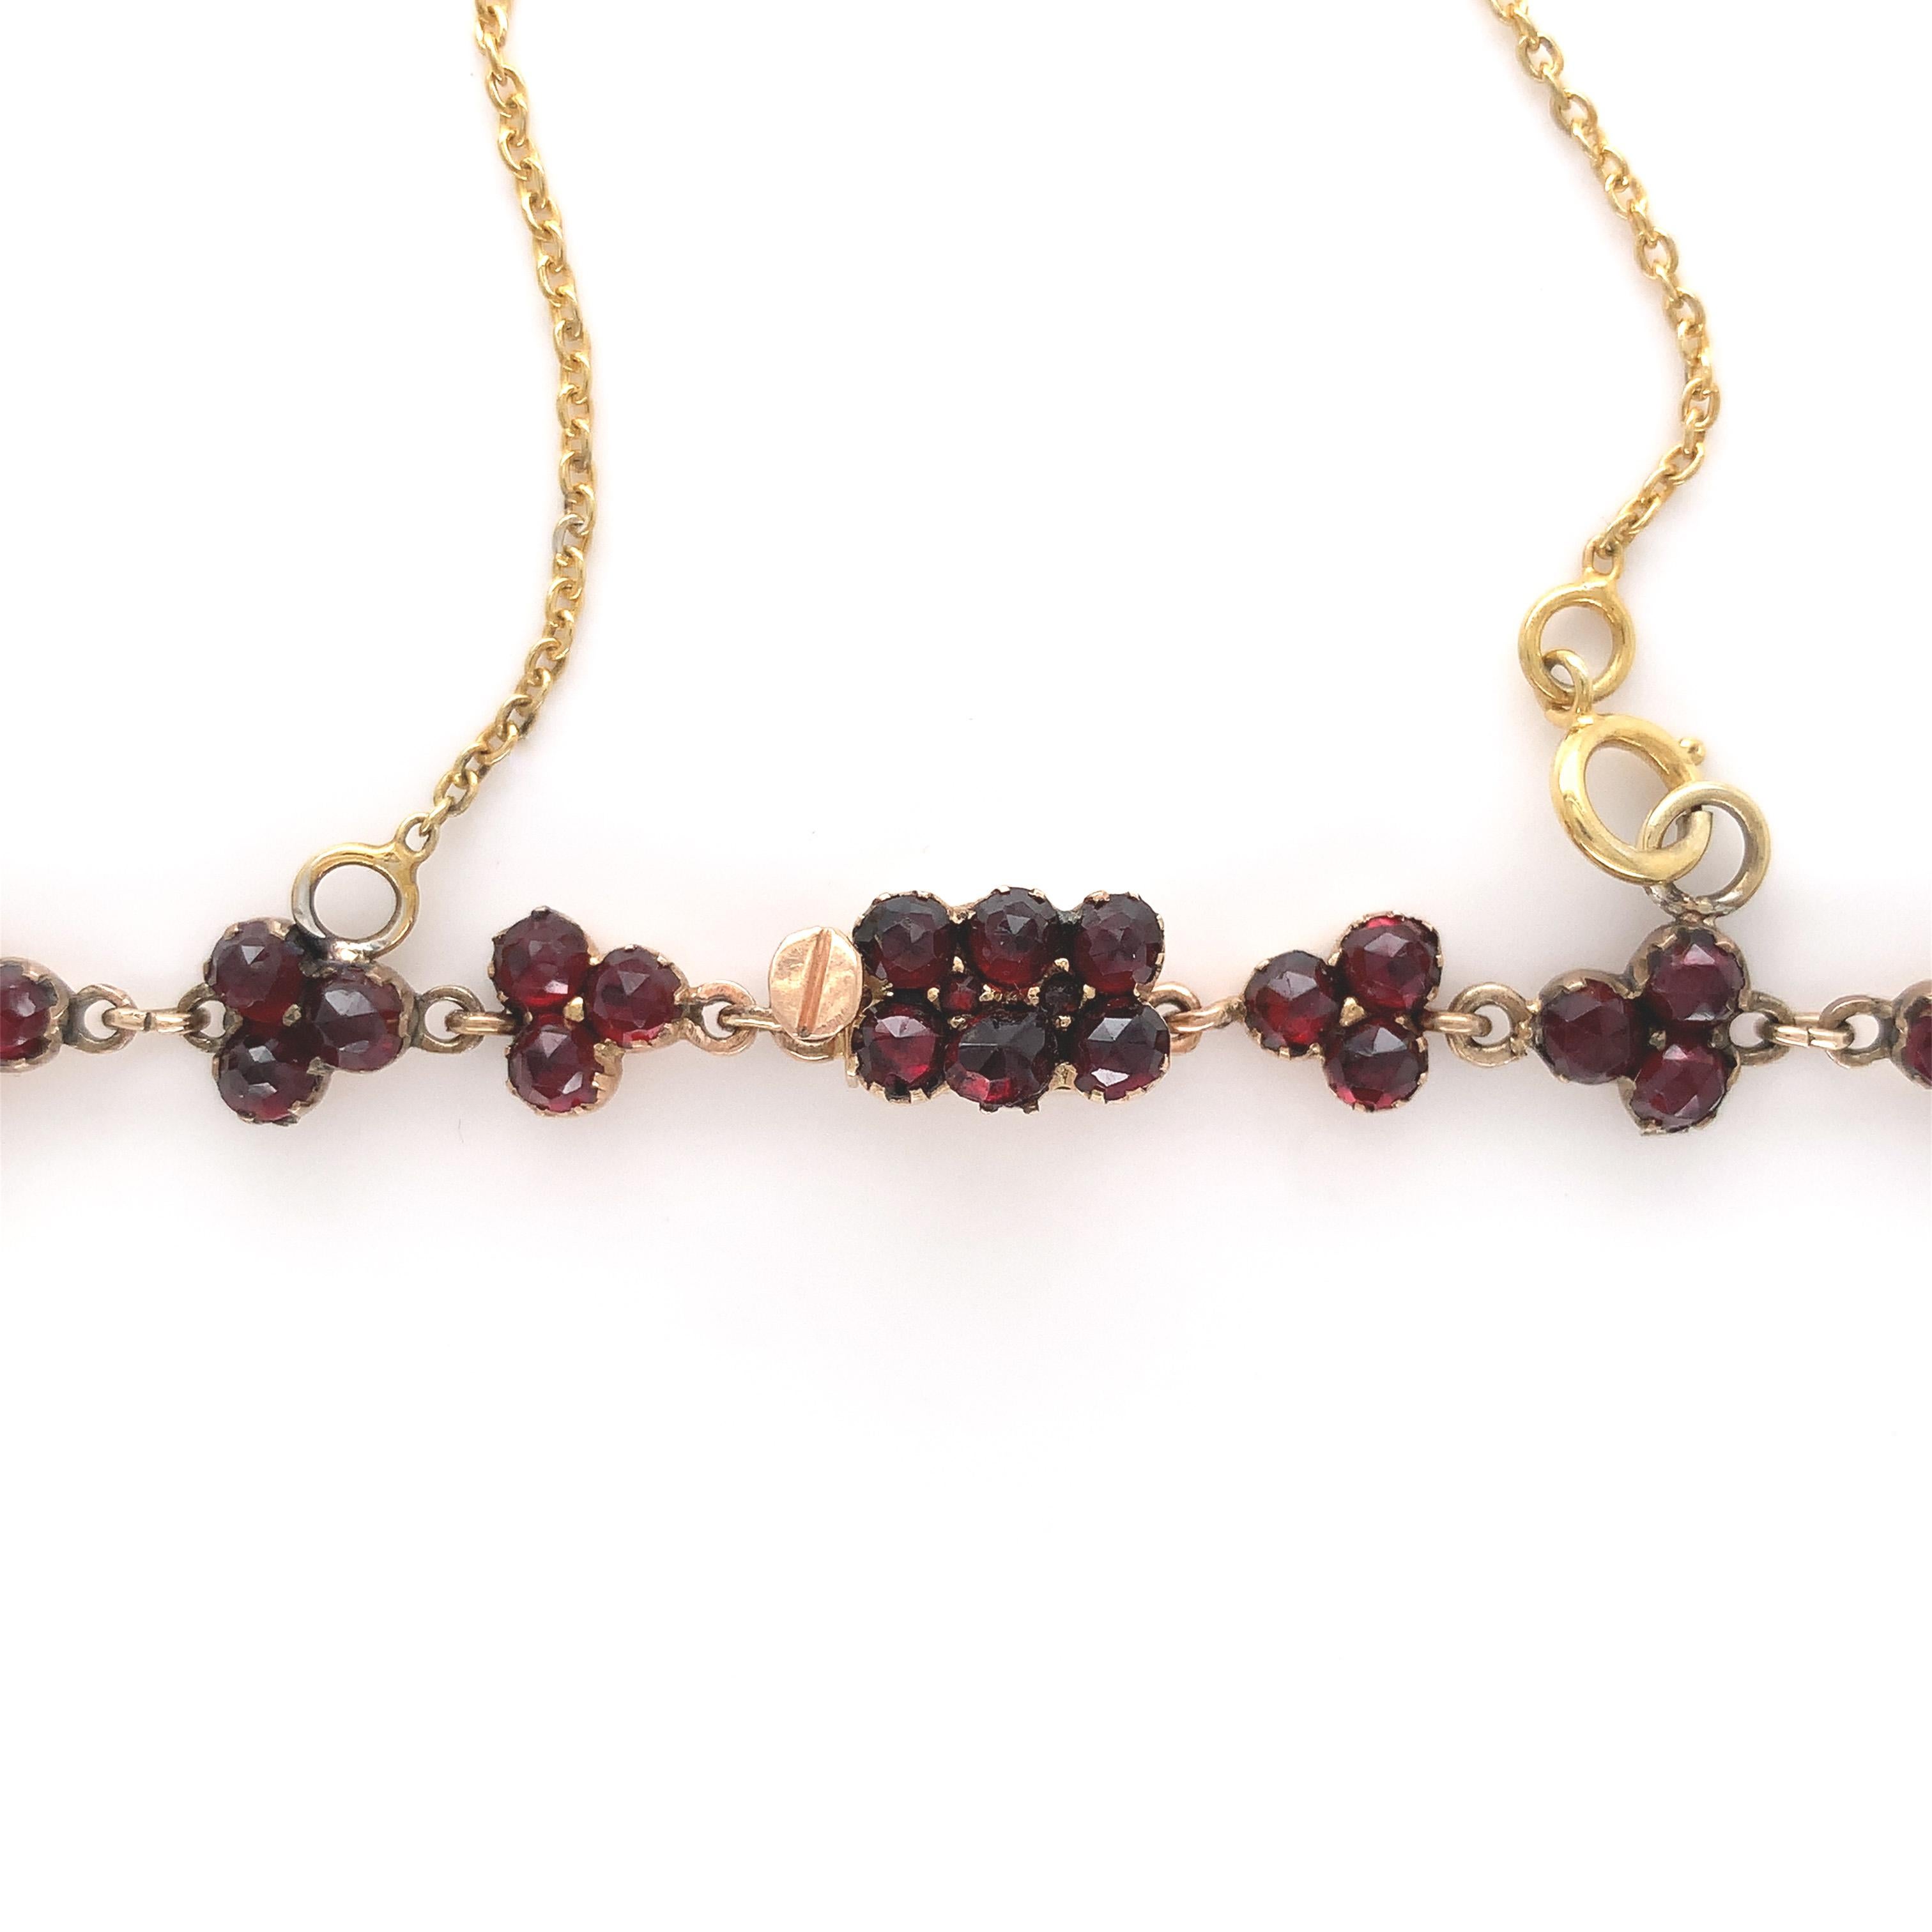 Women's or Men's Bohemian Garnet Necklace with 7 drops  For Sale